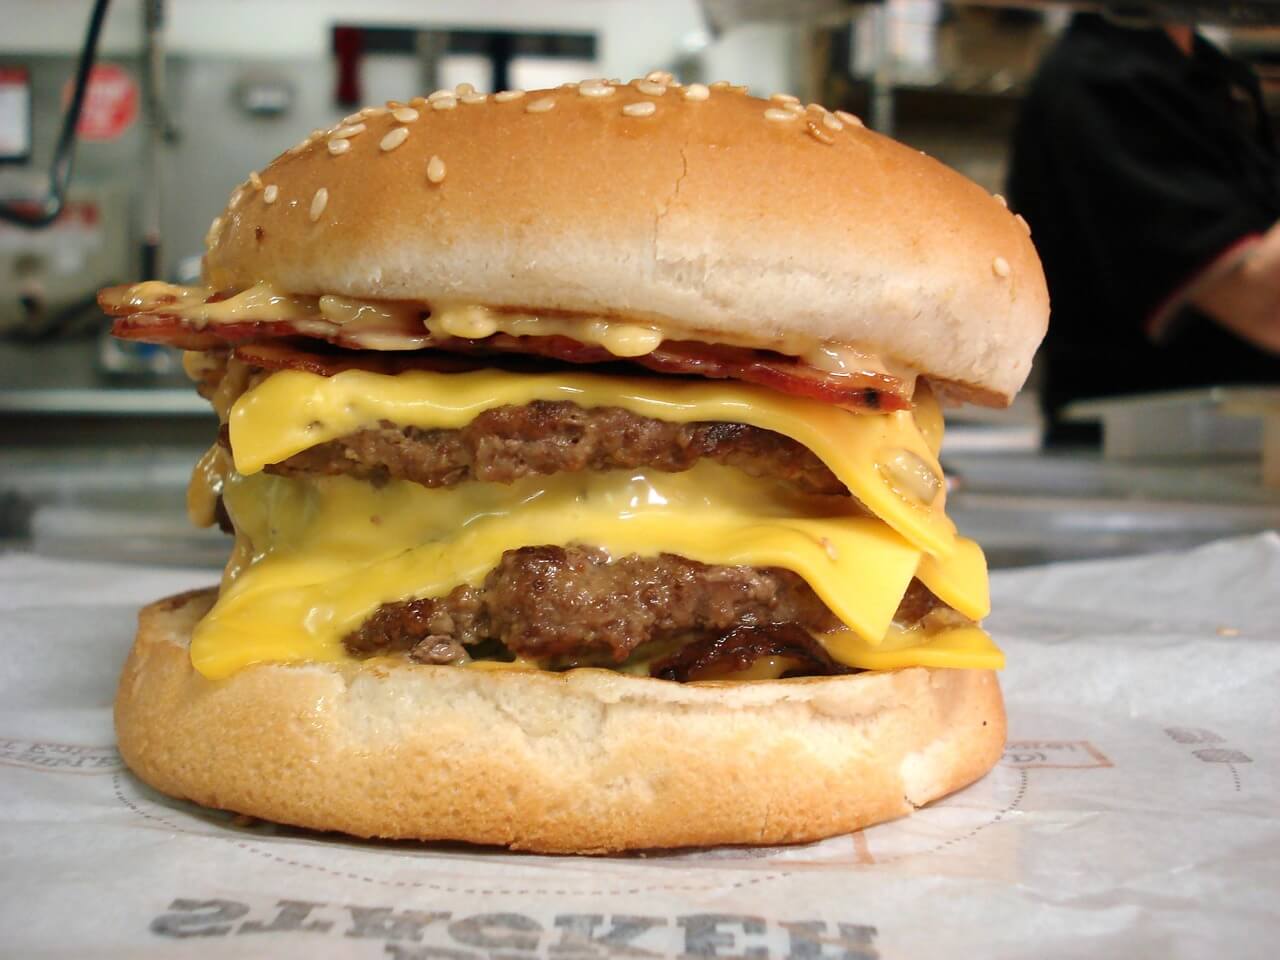 The Top 54 Fast Food Items in the Nation | Five Guys Cheeseburger | FastFoodMenuPrices.com